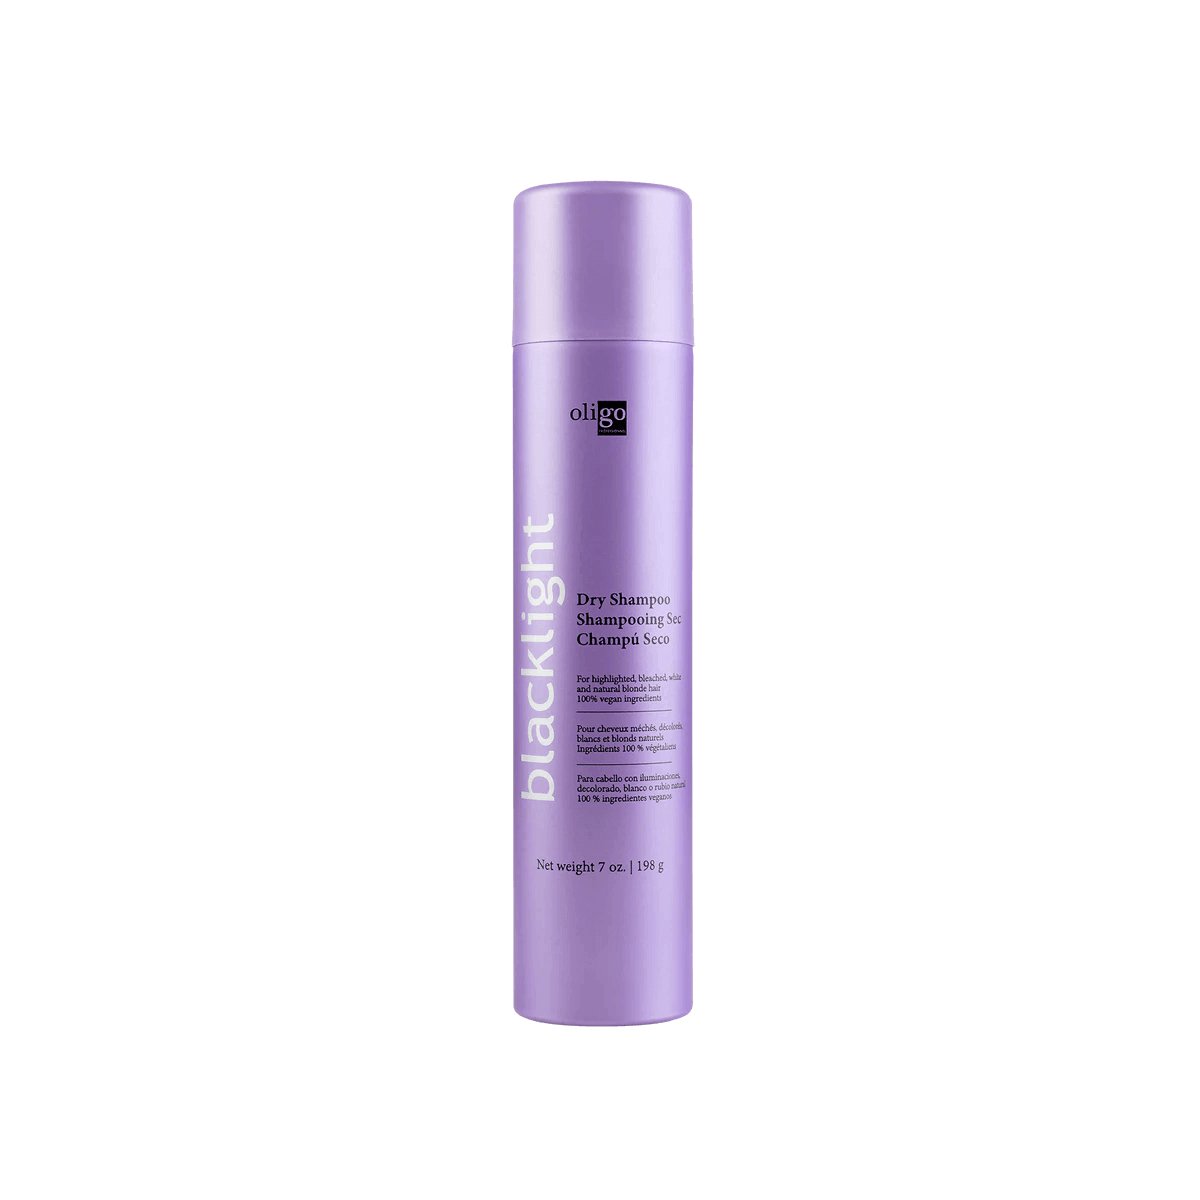 Oligo Blacklight Dry Shampoo a Hair Styling Products from Simply Colour Hair Salon Studio & Online Store